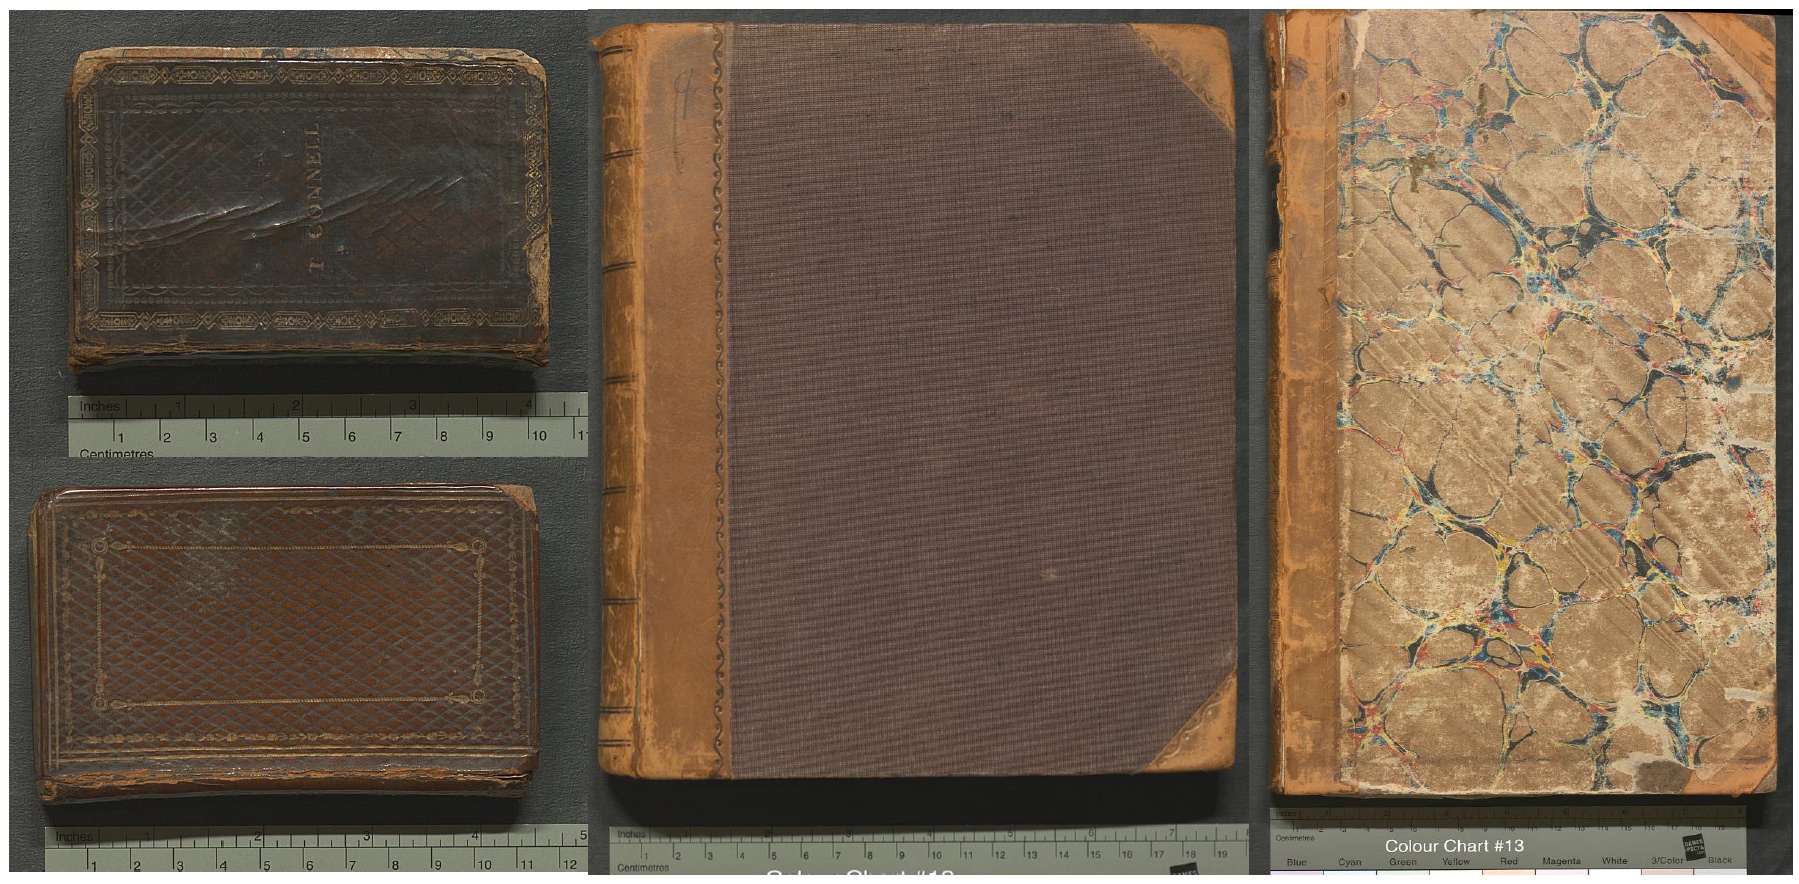 Four images: On the top left and lower left are the leather bindings for two hand-sized manuscripts. In the centre is a quarter leather binding with cloth for a squarish manuscript. On the right is a quarter leather binding with marbled paper and this manuscript is folio sized.